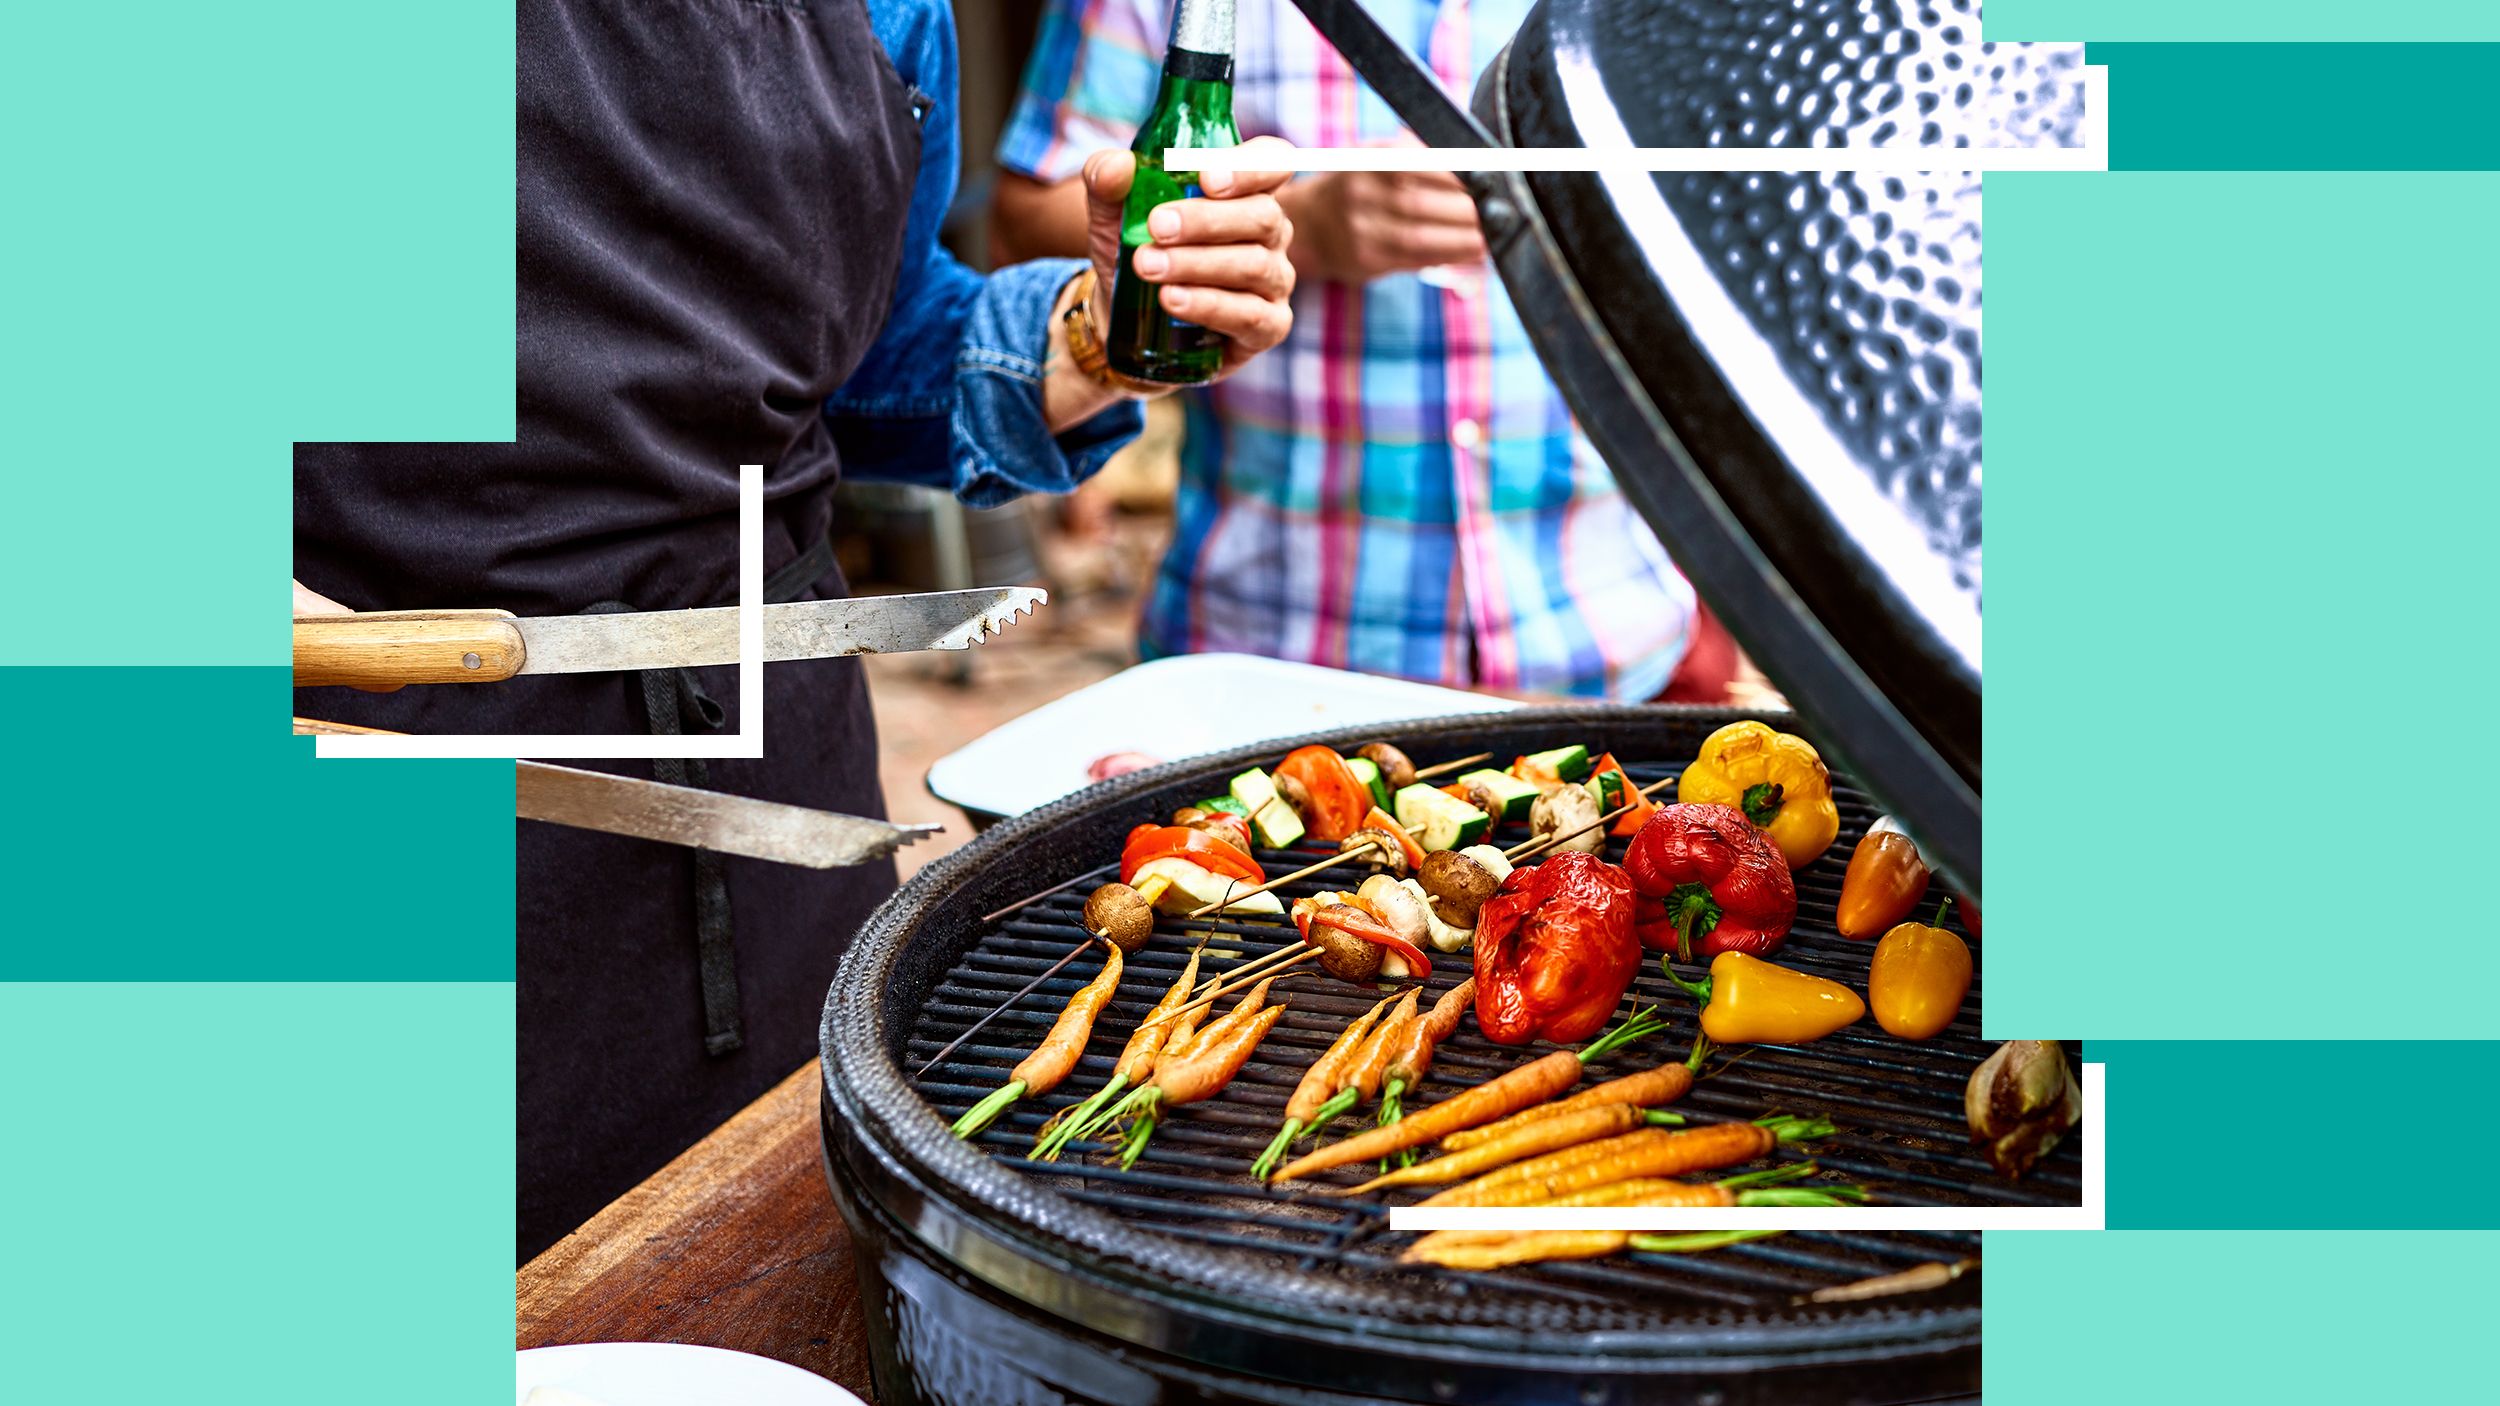 The 15 Best Grilling Gifts in 2022 - Grilling Gift Ideas